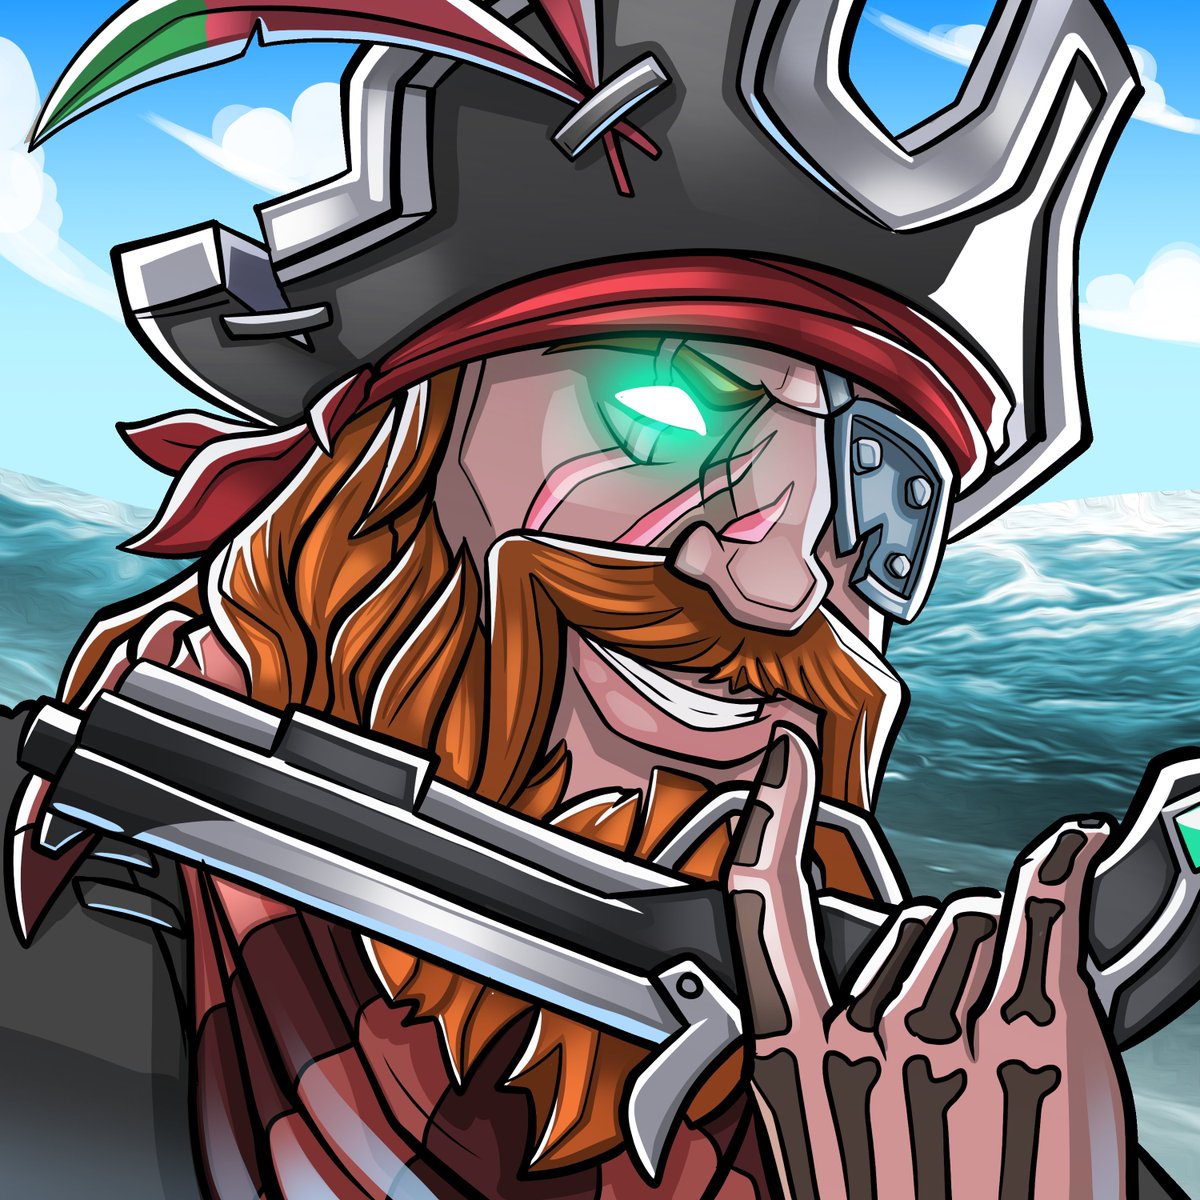 finished drawing! Commission for @HitboTC #SeaOfThieves #BeMorePirate